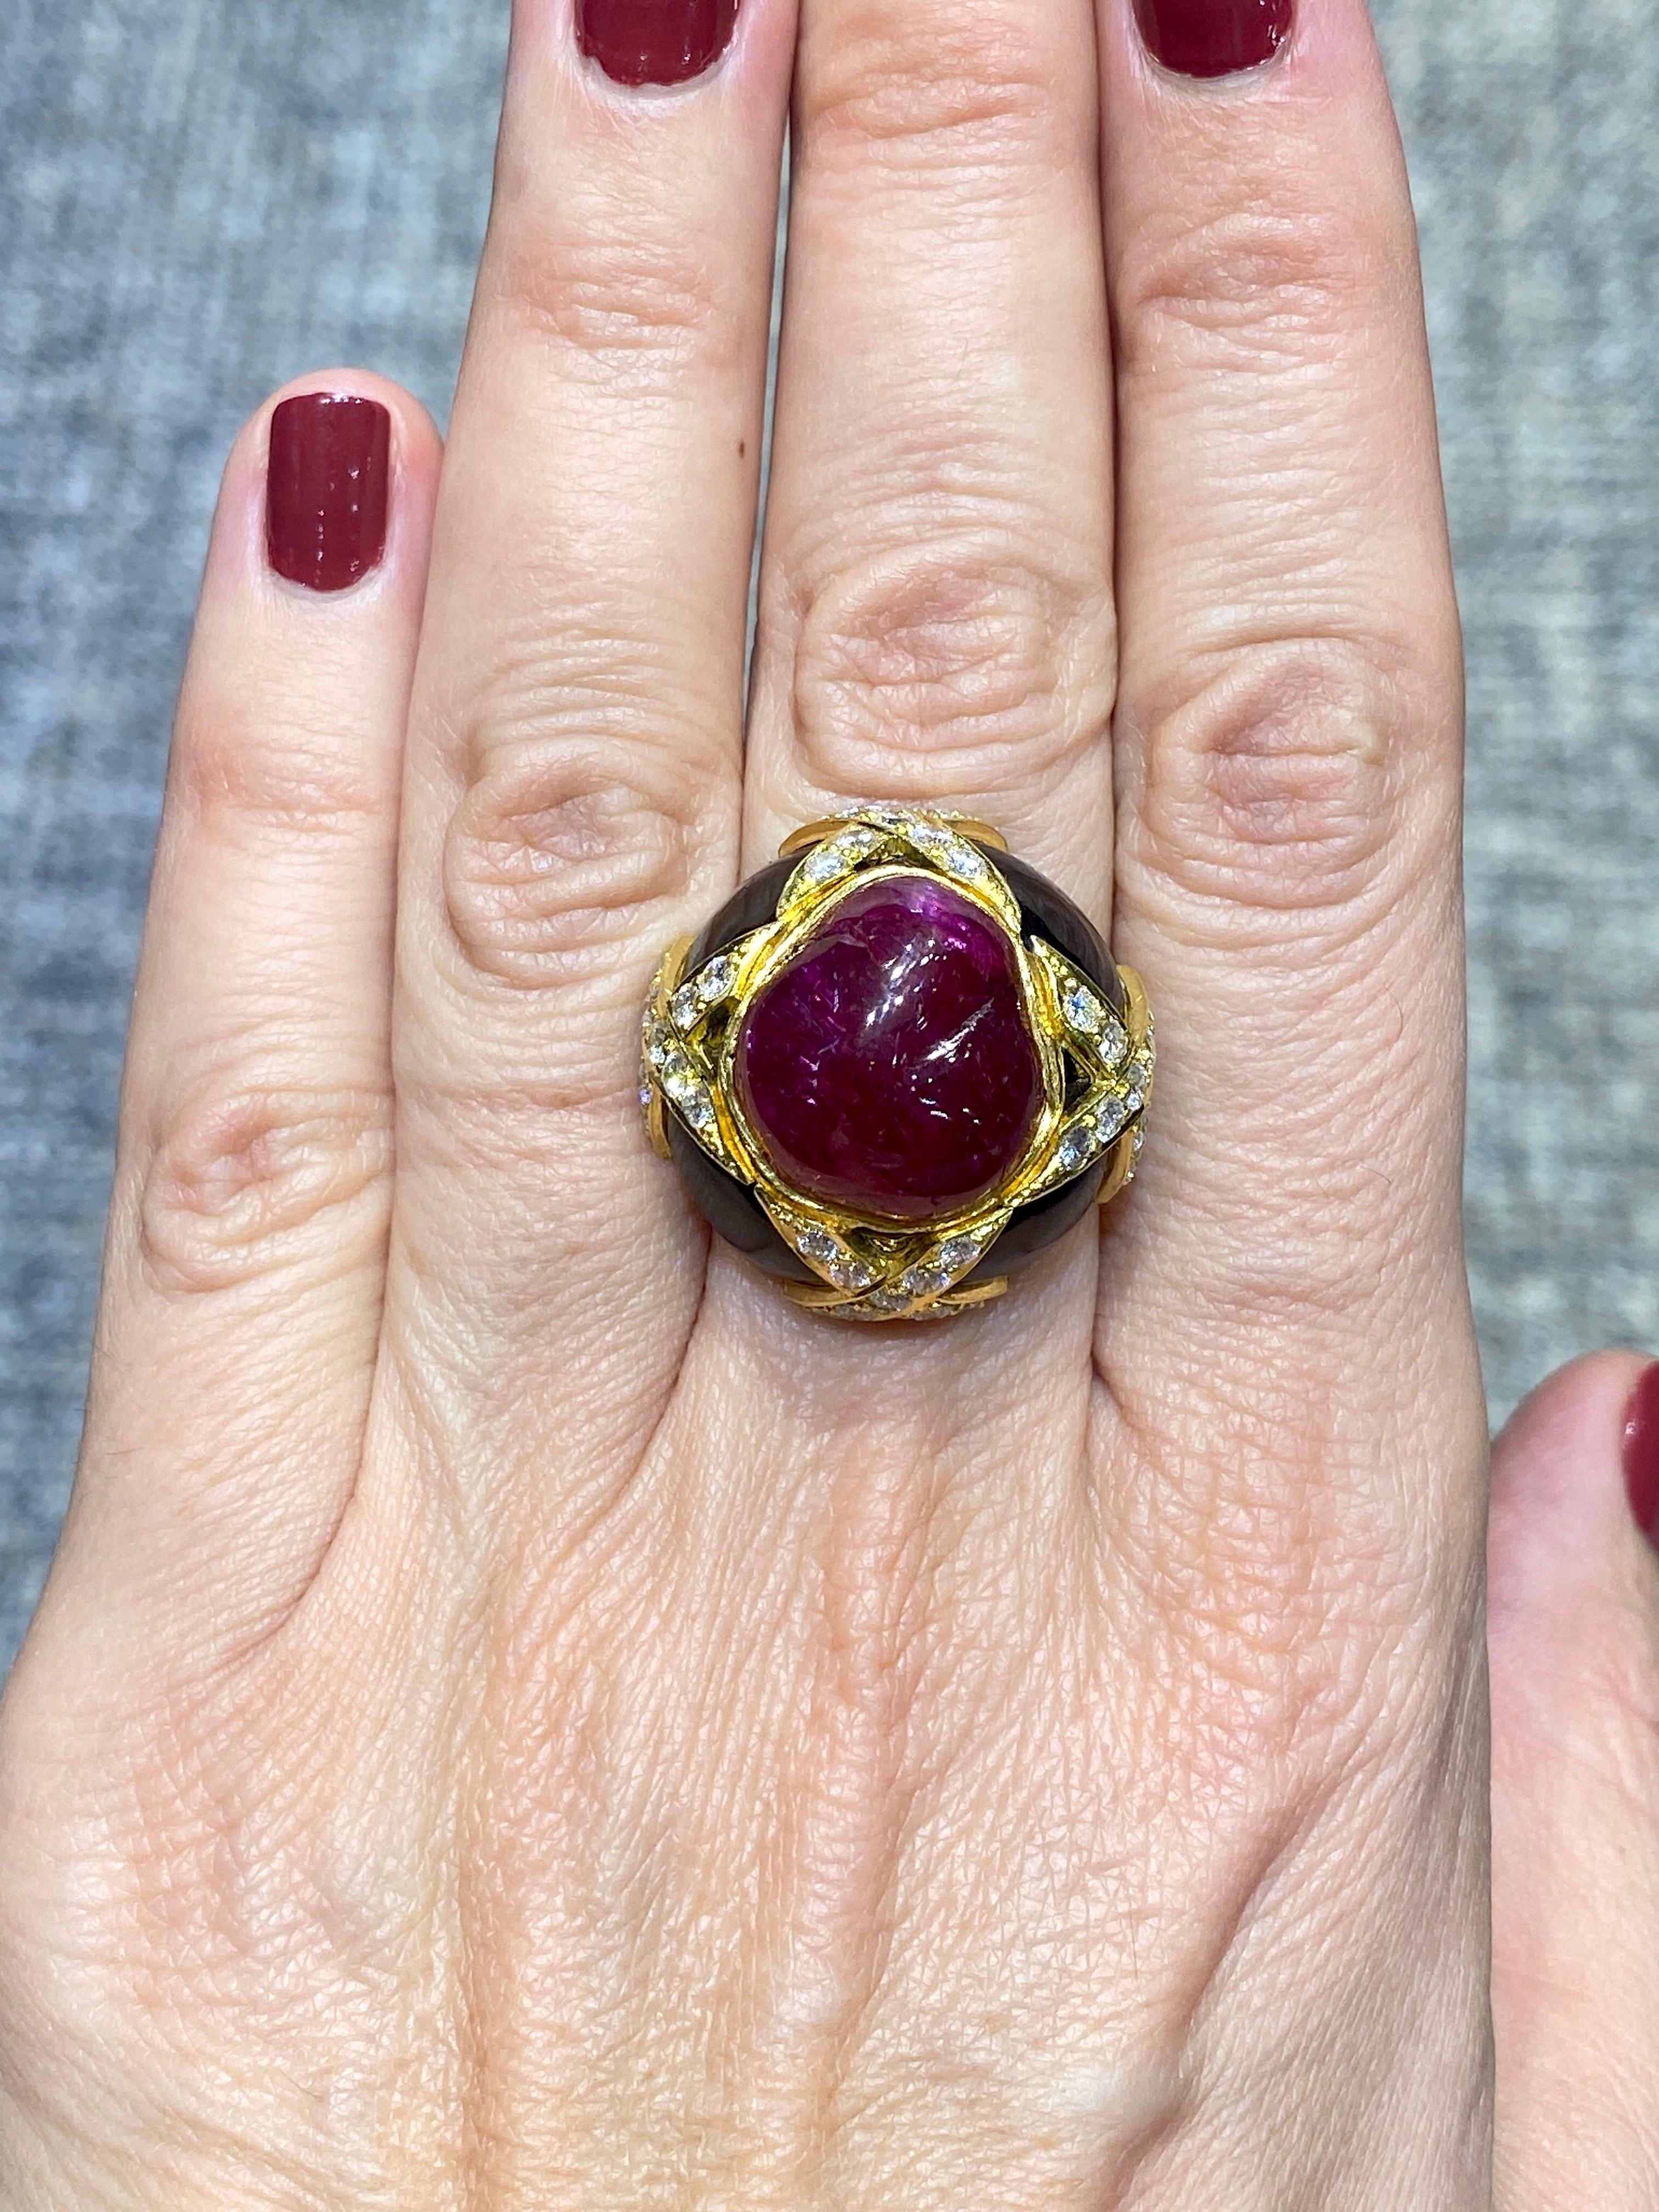 This stunning 1960s cocktail ring is designed around a remarkable unheated natural ruby. It is adorned with onyx and diamonds and set in 18 k gold. It is a beauty to behold.